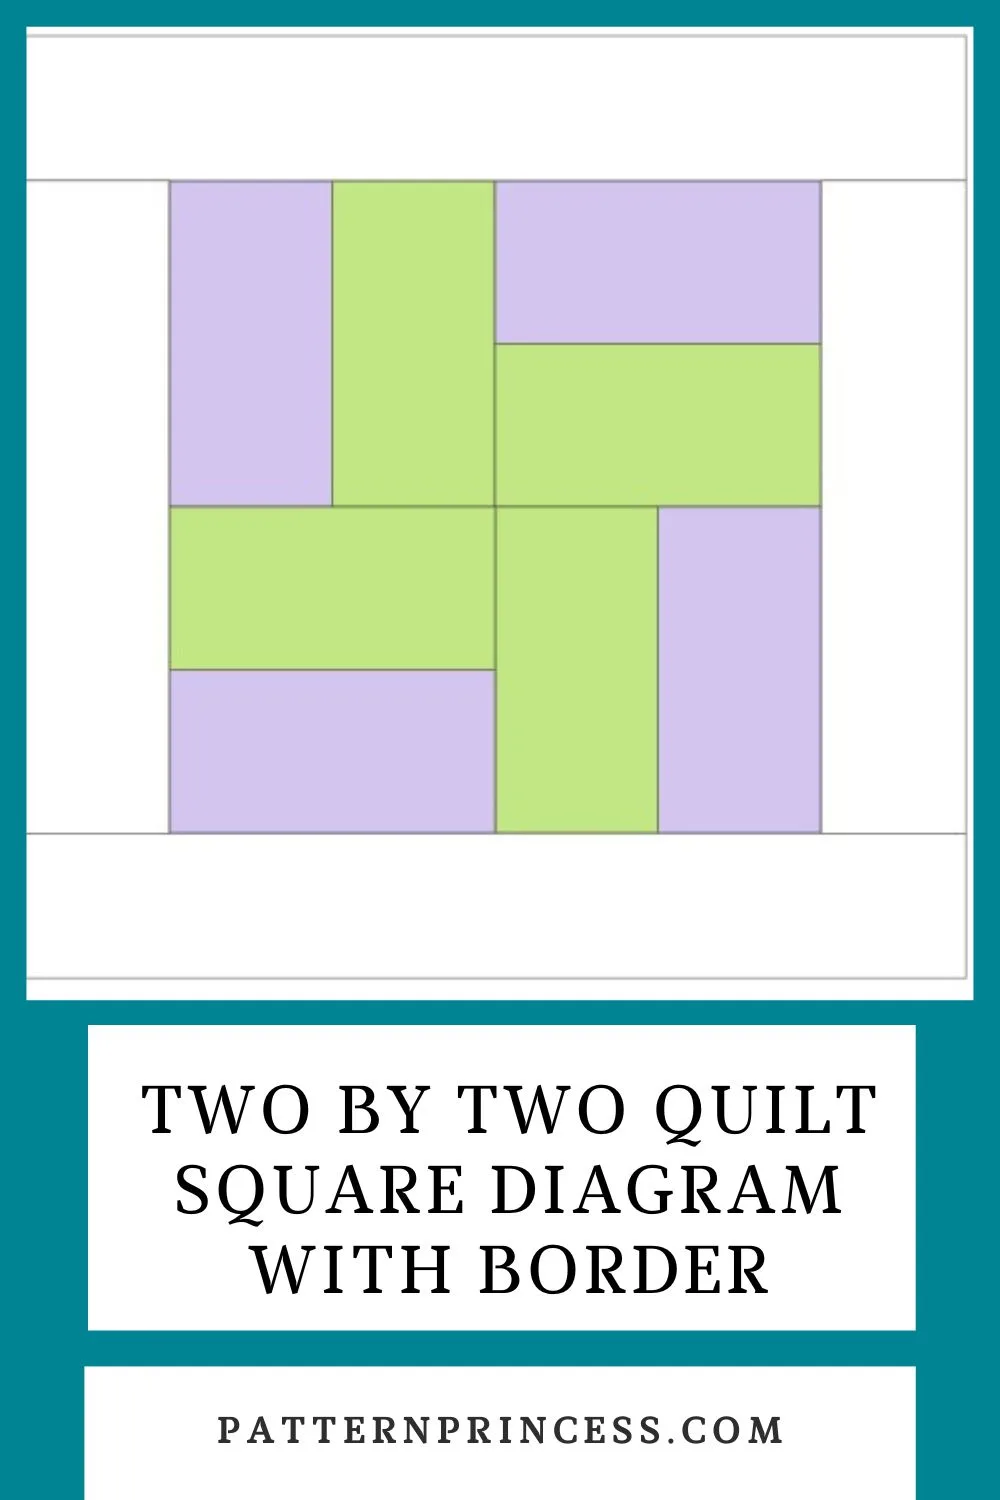 Two by Two quilt square diagram with border